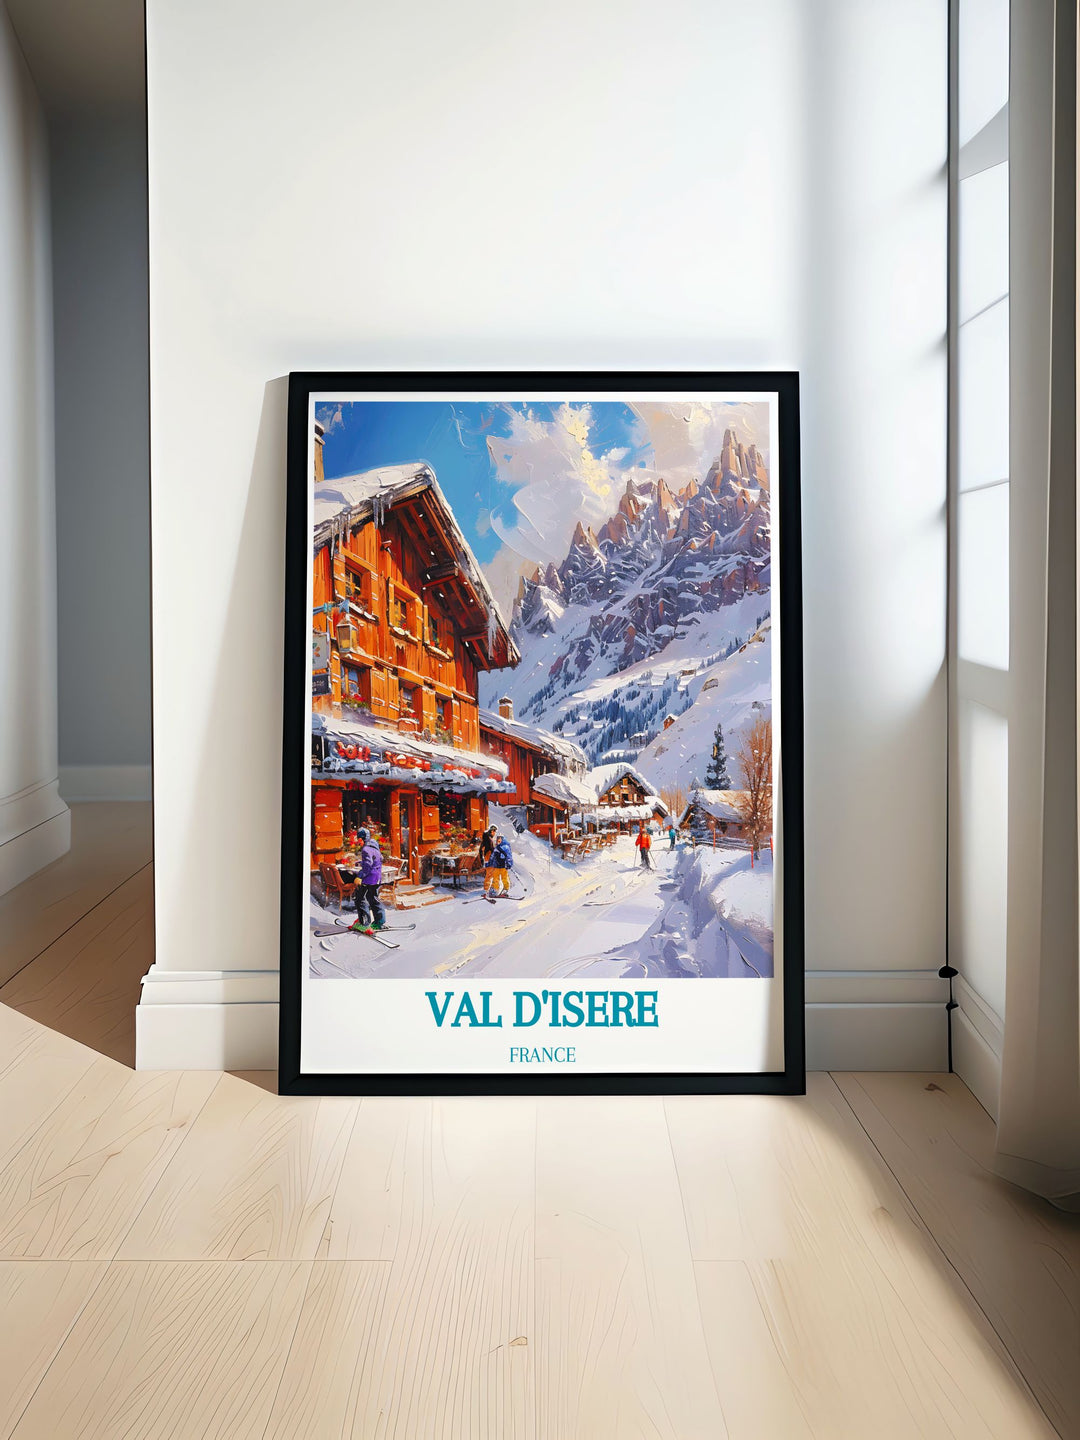 Highlight the picturesque scenery of Solaise in Val dIsere with this beautifully detailed art print, perfect for adding a touch of alpine elegance to your home decor and celebrating the French Alps natural splendor.